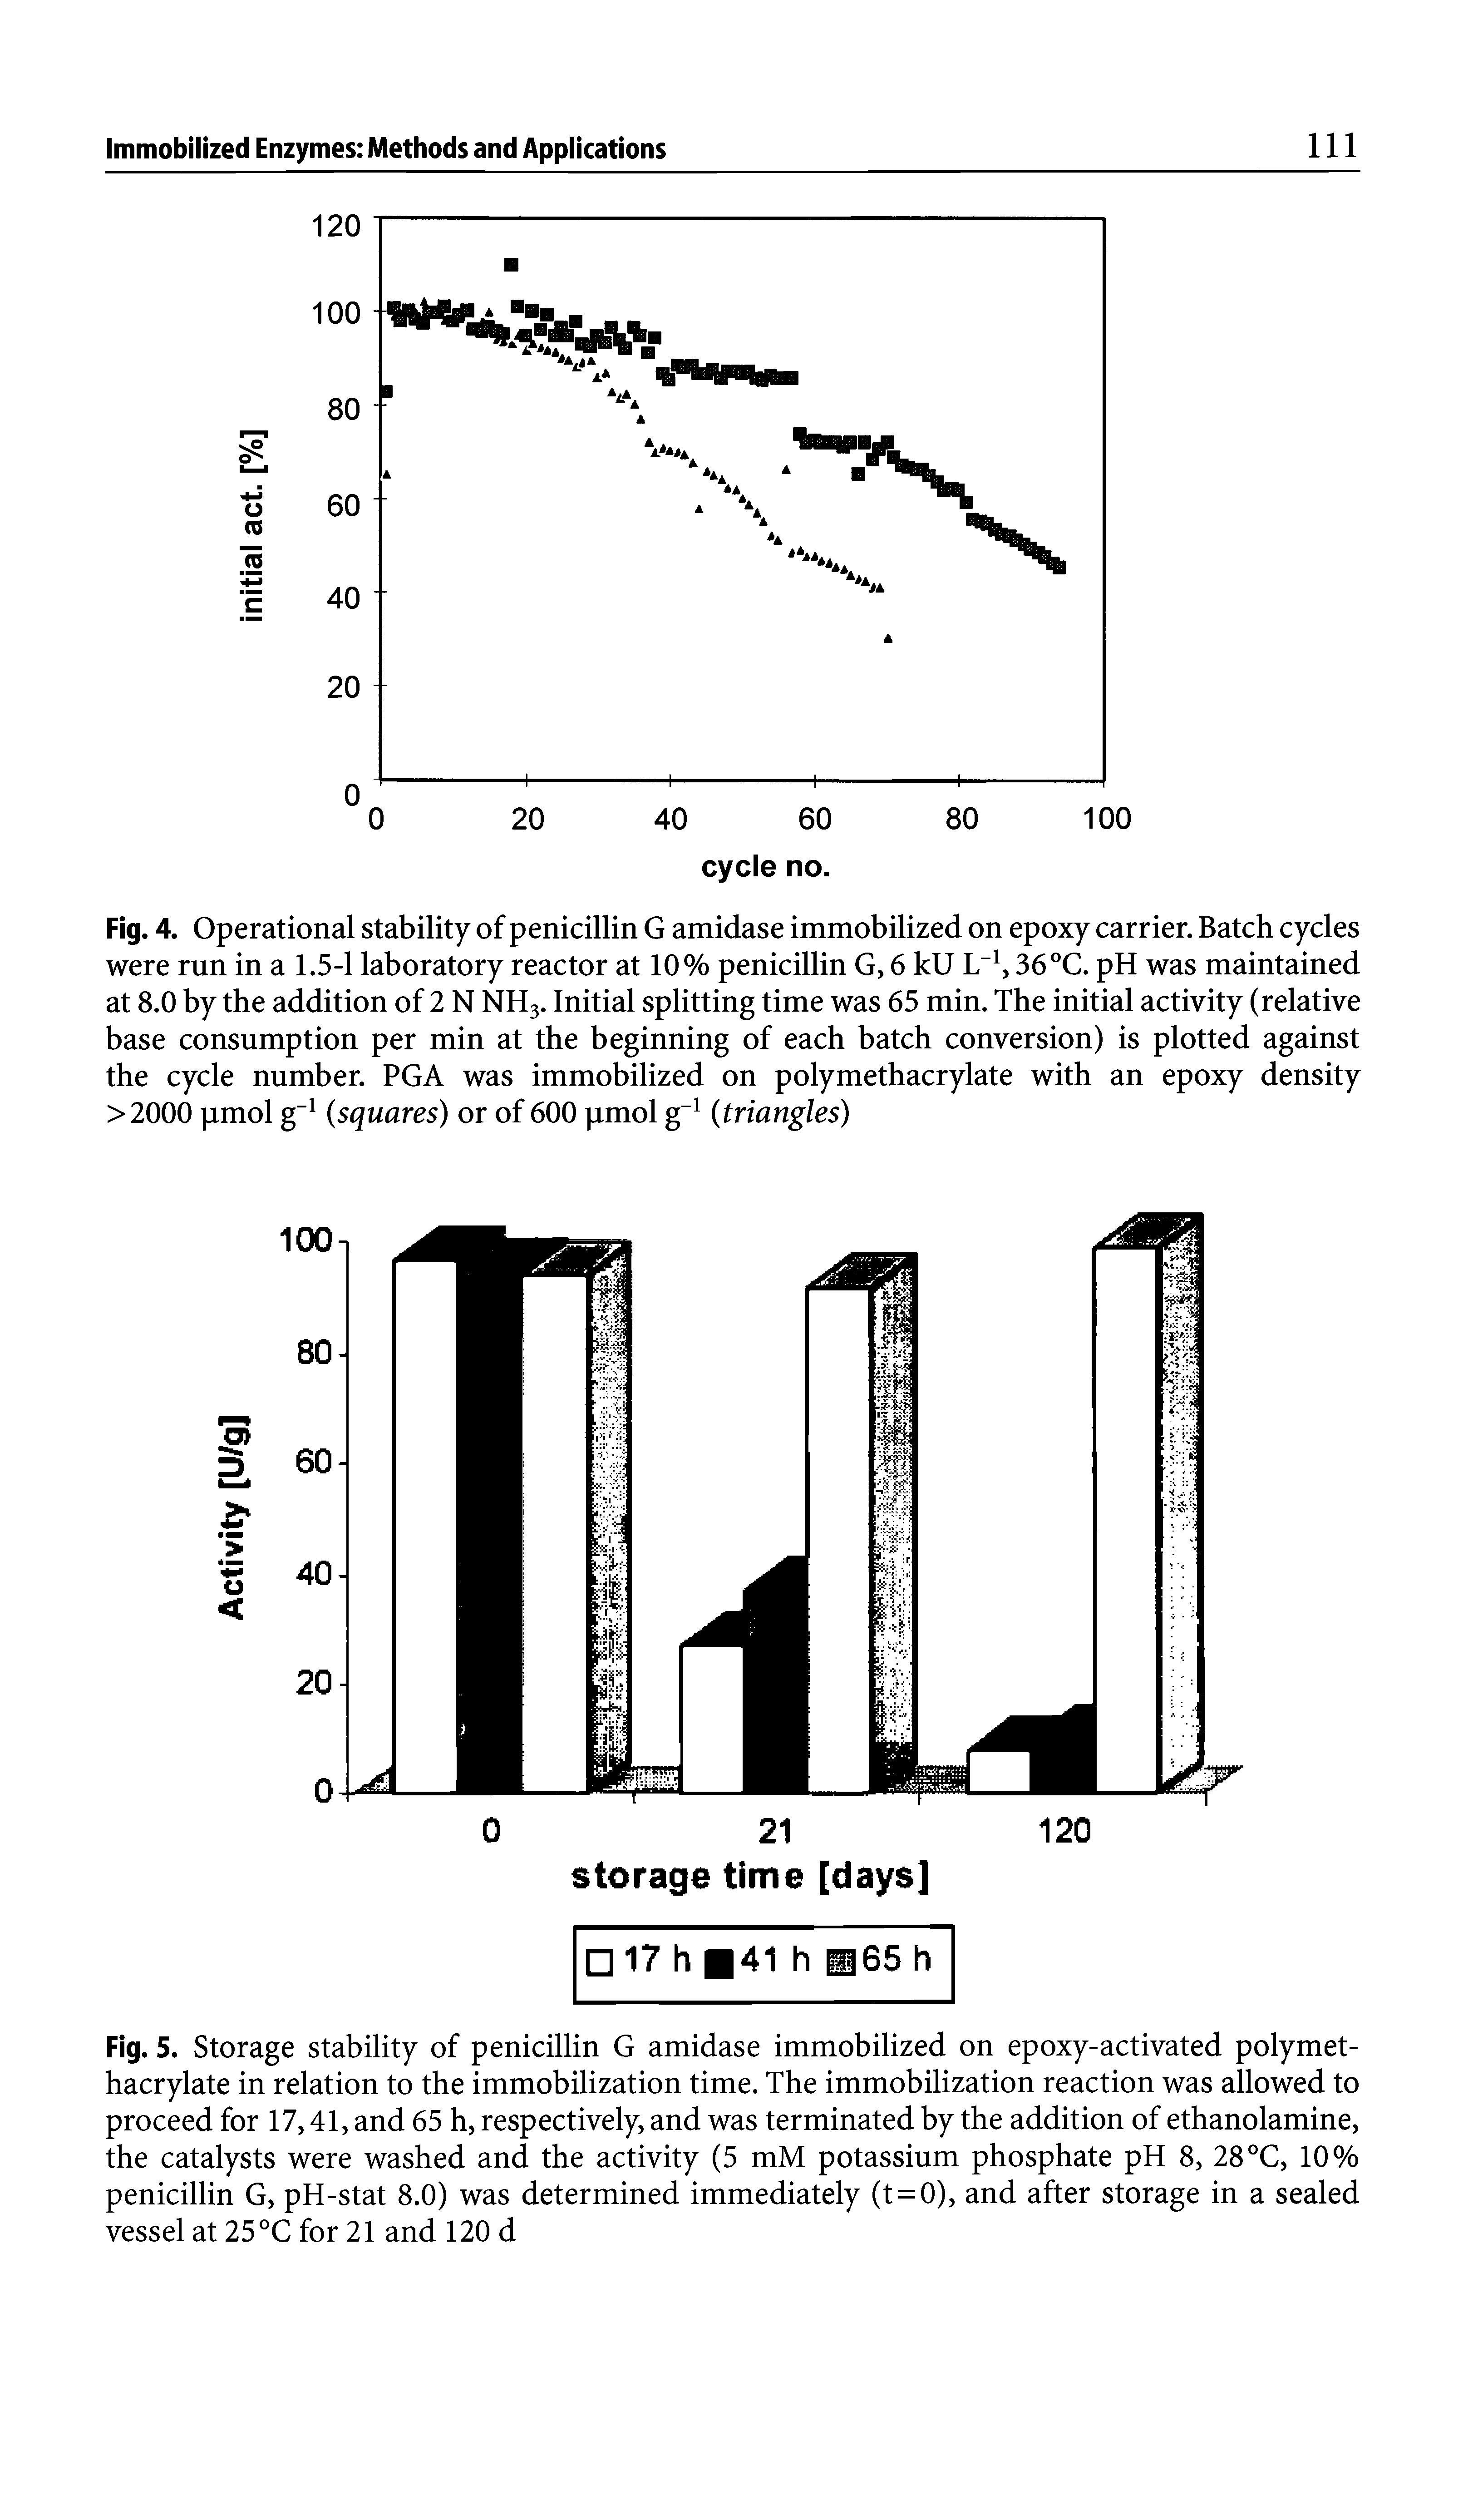 Fig. 5. Storage stability of penicillin G amidase immobilized on epoxy-activated polymethacrylate in relation to the immobilization time. The immobilization reaction was allowed to proceed for 17,41, and 65 h, respectively, and was terminated by the addition of ethanolamine, the catalysts were washed and the activity (5 mM potassium phosphate pH 8, 28 °C, 10% penicillin G, pH-stat 8.0) was determined immediately (t = 0), and after storage in a sealed vessel at 25 °C for 21 and 120 d...